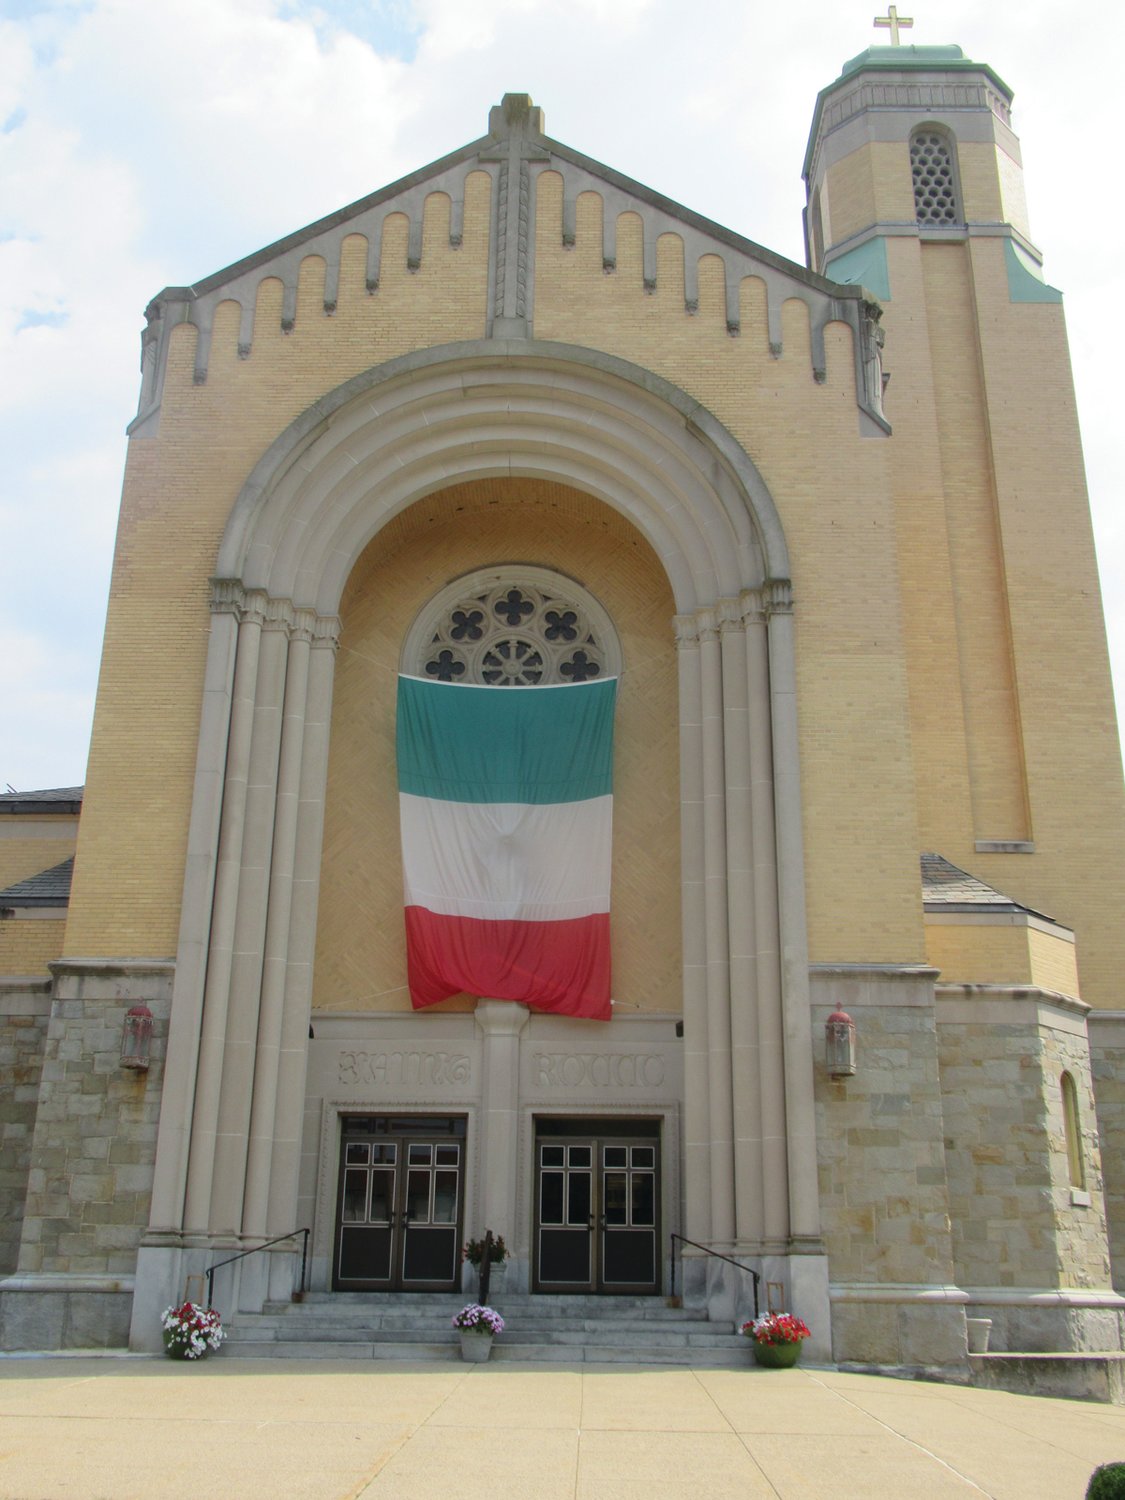 SPECIAL SALUTE: In keeping with the tradition of Saint Rocco’s annual Feast and Festival, this huge Italian flag is hung over the entrance to the church as another example of the classic celebration that will be held from Aug. 12-15 in Johnston.